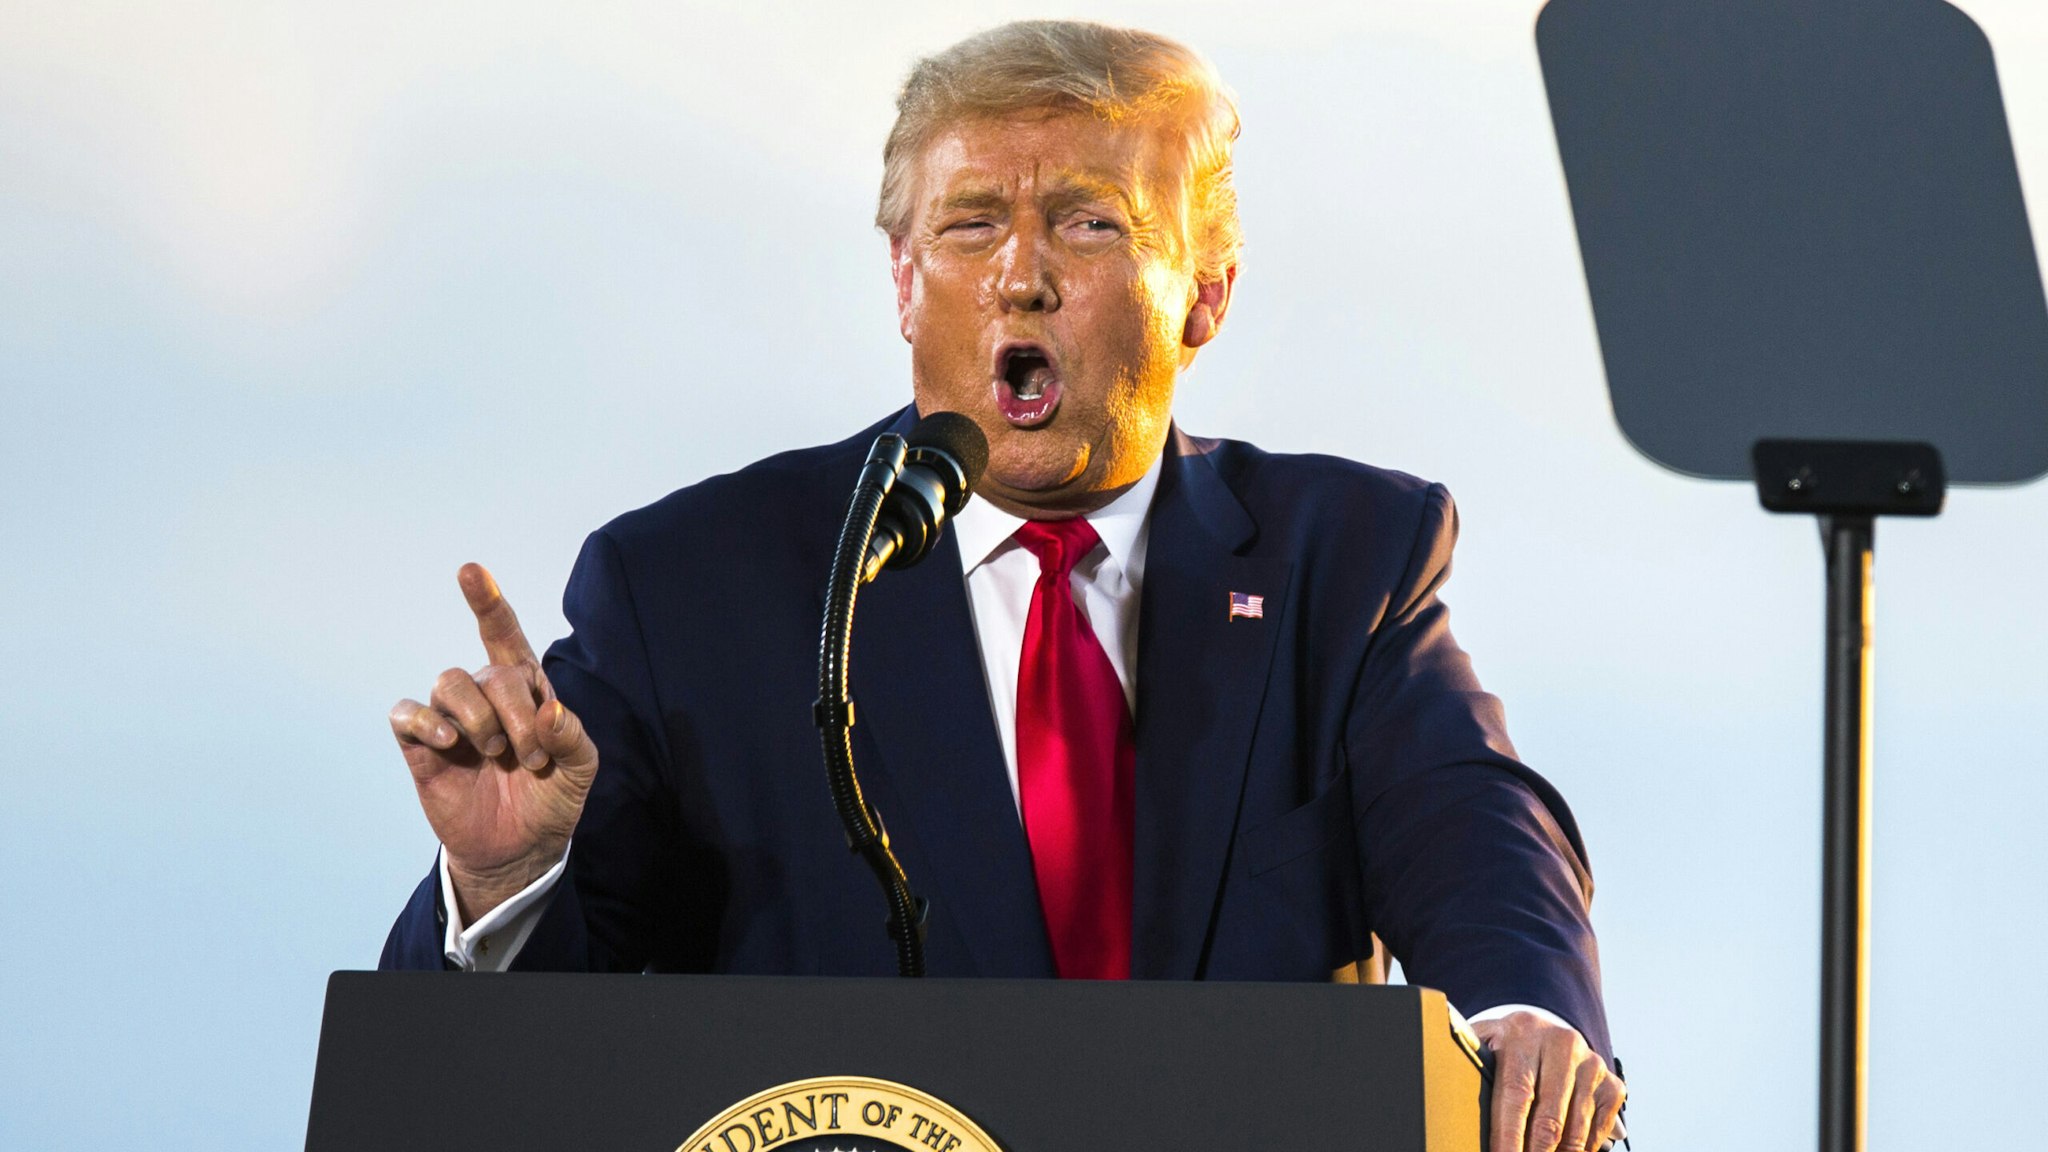 U.S. President Donald Trump speaks during a campaign rally at the Pro Star Aviation hangar in Londonderry, New Hampshire, U.S., on Friday, Aug. 28, 2020. Trump took aim at people protesting racism and police brutality, saying they are just looking for trouble and dont know about the killing of a Black man at the hands of police in Minneapolis that led to demonstrations nationally.